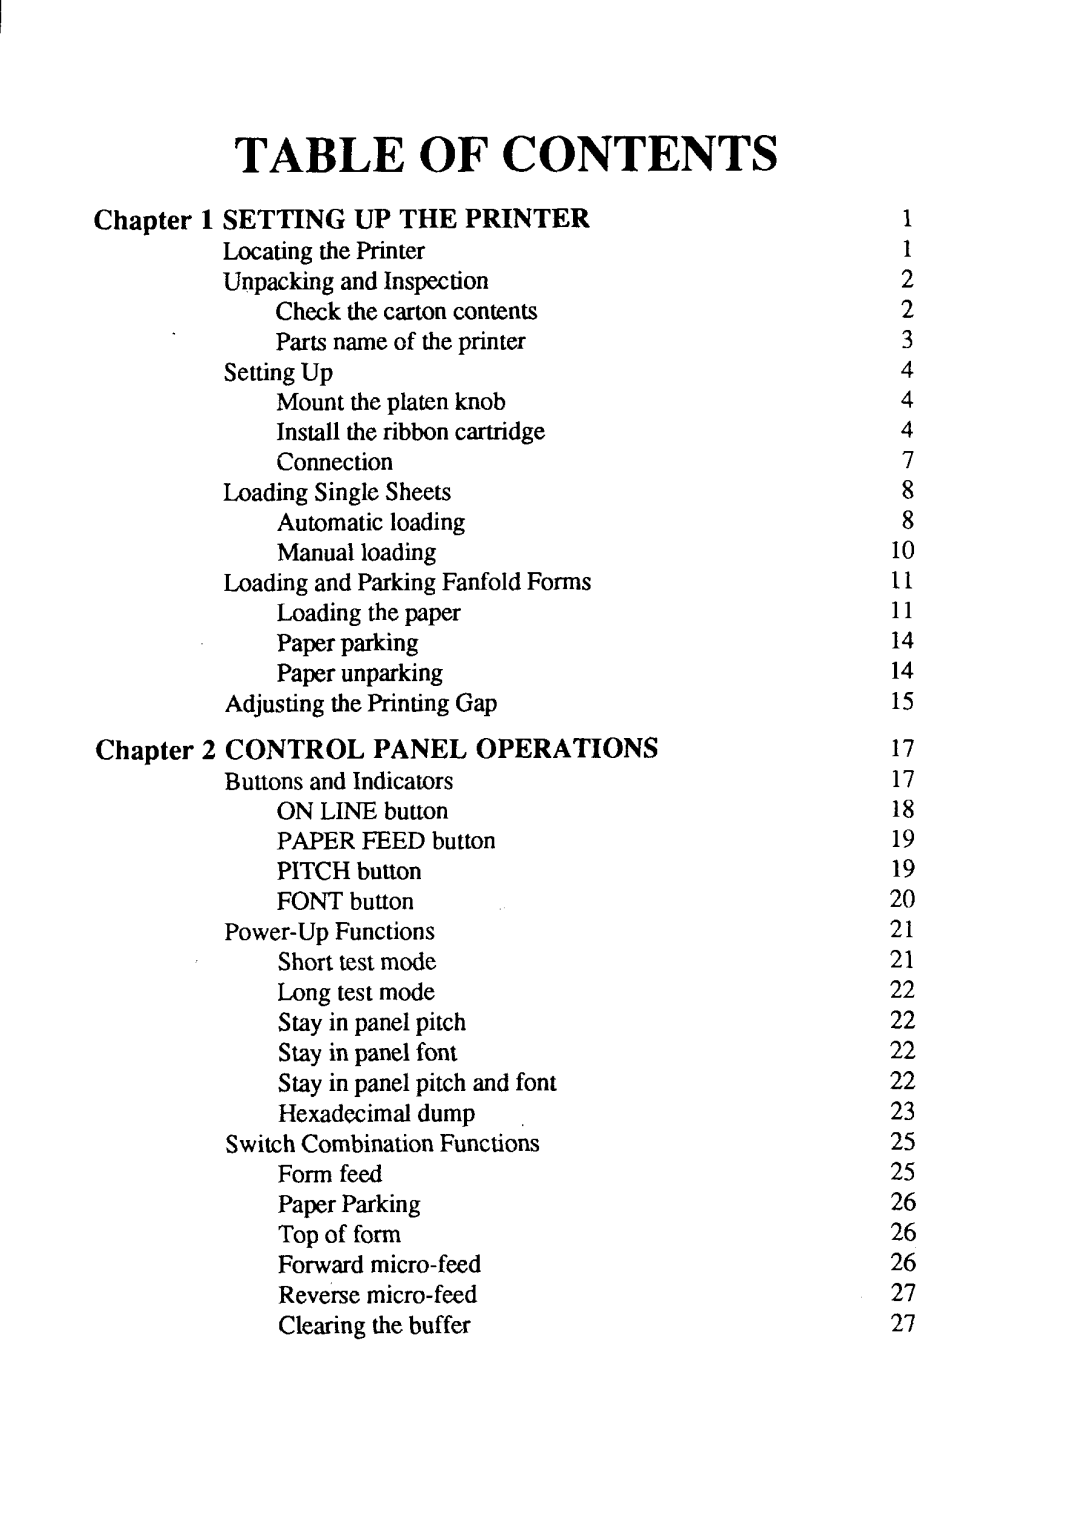 Star Micronics NX-1001 manual Table Of Contents 